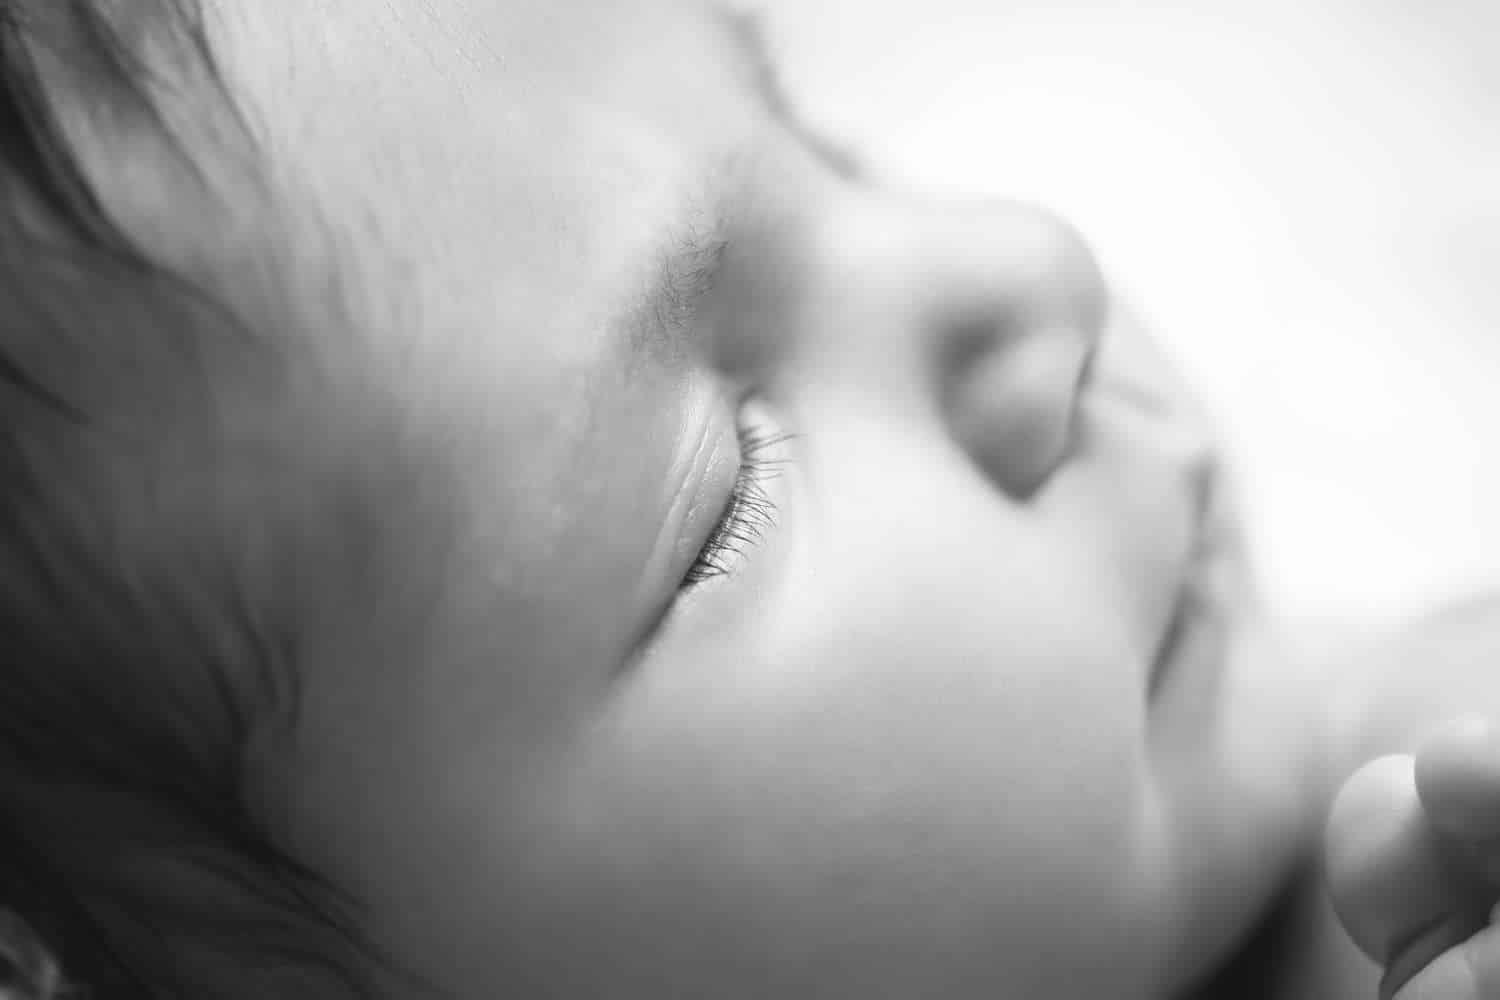 newborn photographer in rochester ny captures macros image of a newborn baby girl's eyelashes